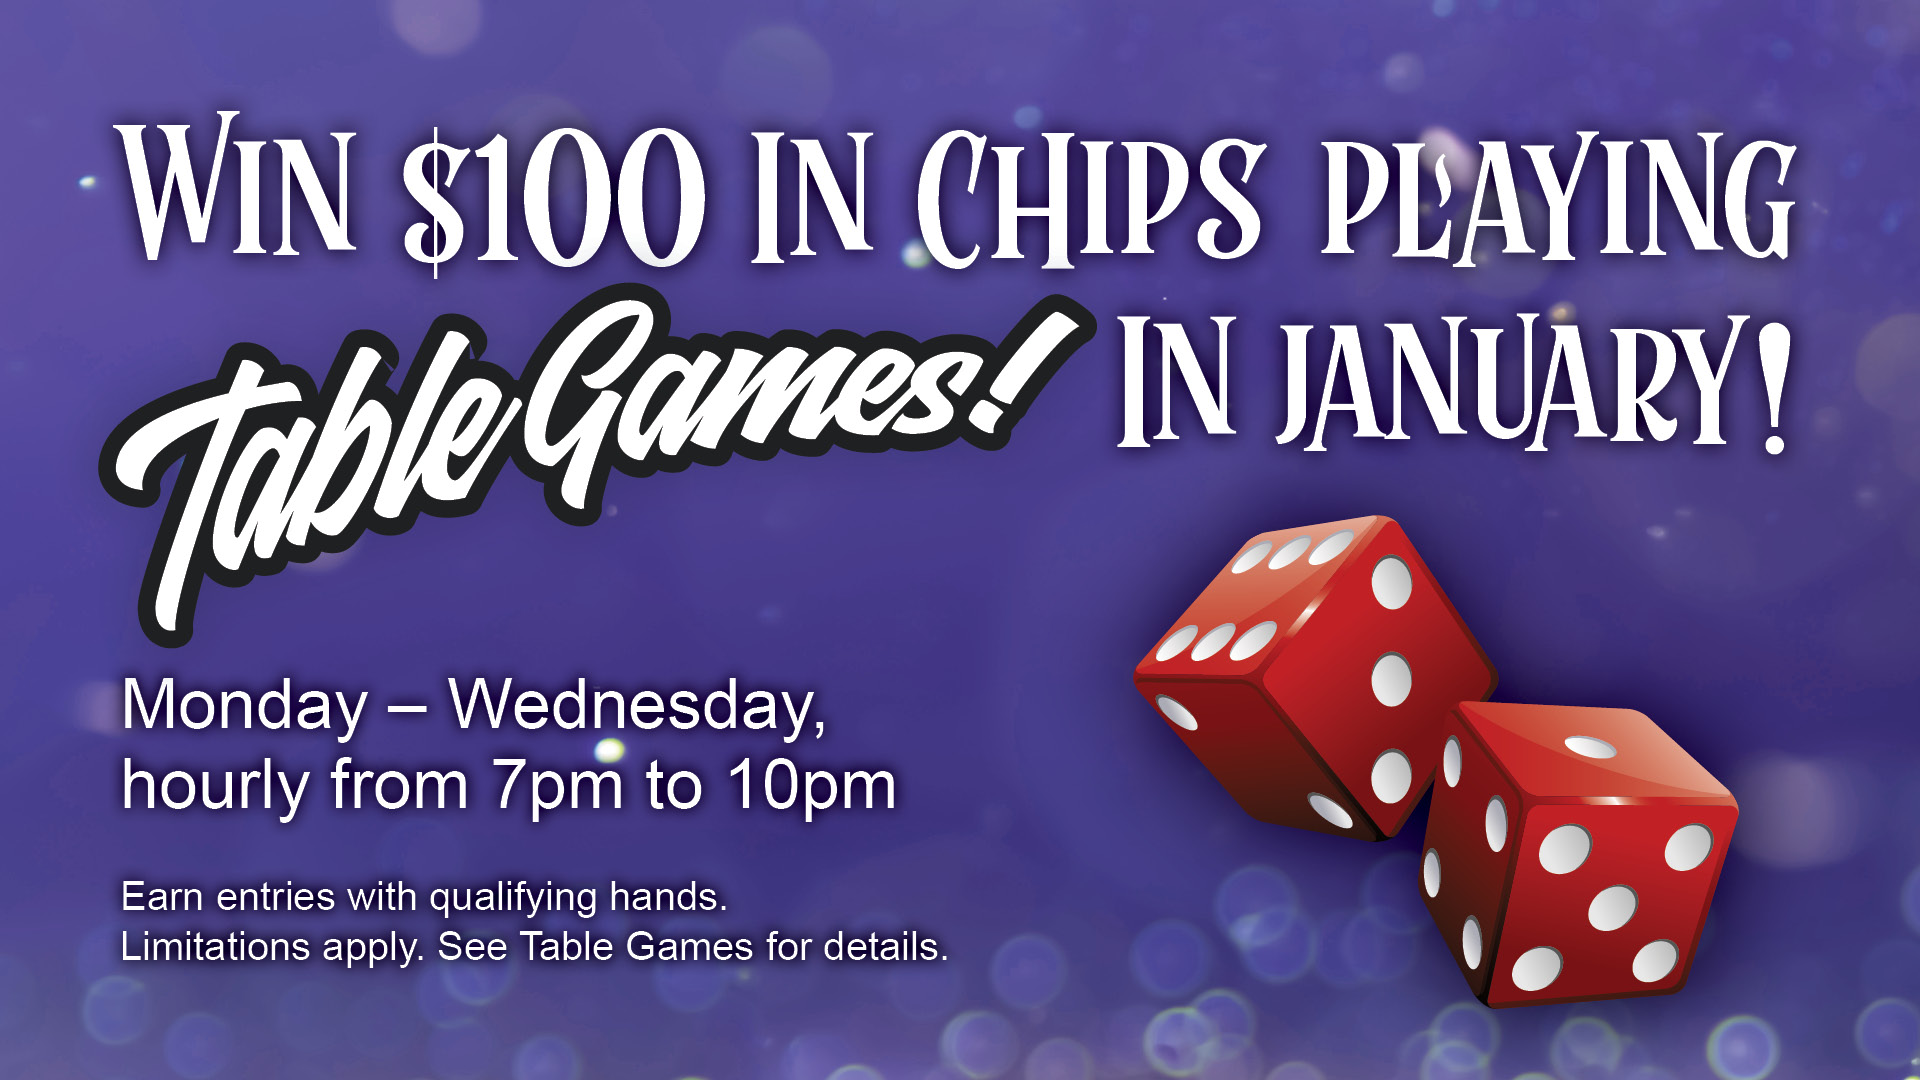 Win $100 in chips playing table games in January! Monday-Wednesday hourly from 7pm to 10pm. Earn entries with qualifying hands. Limitations apply. See Table Games for details.